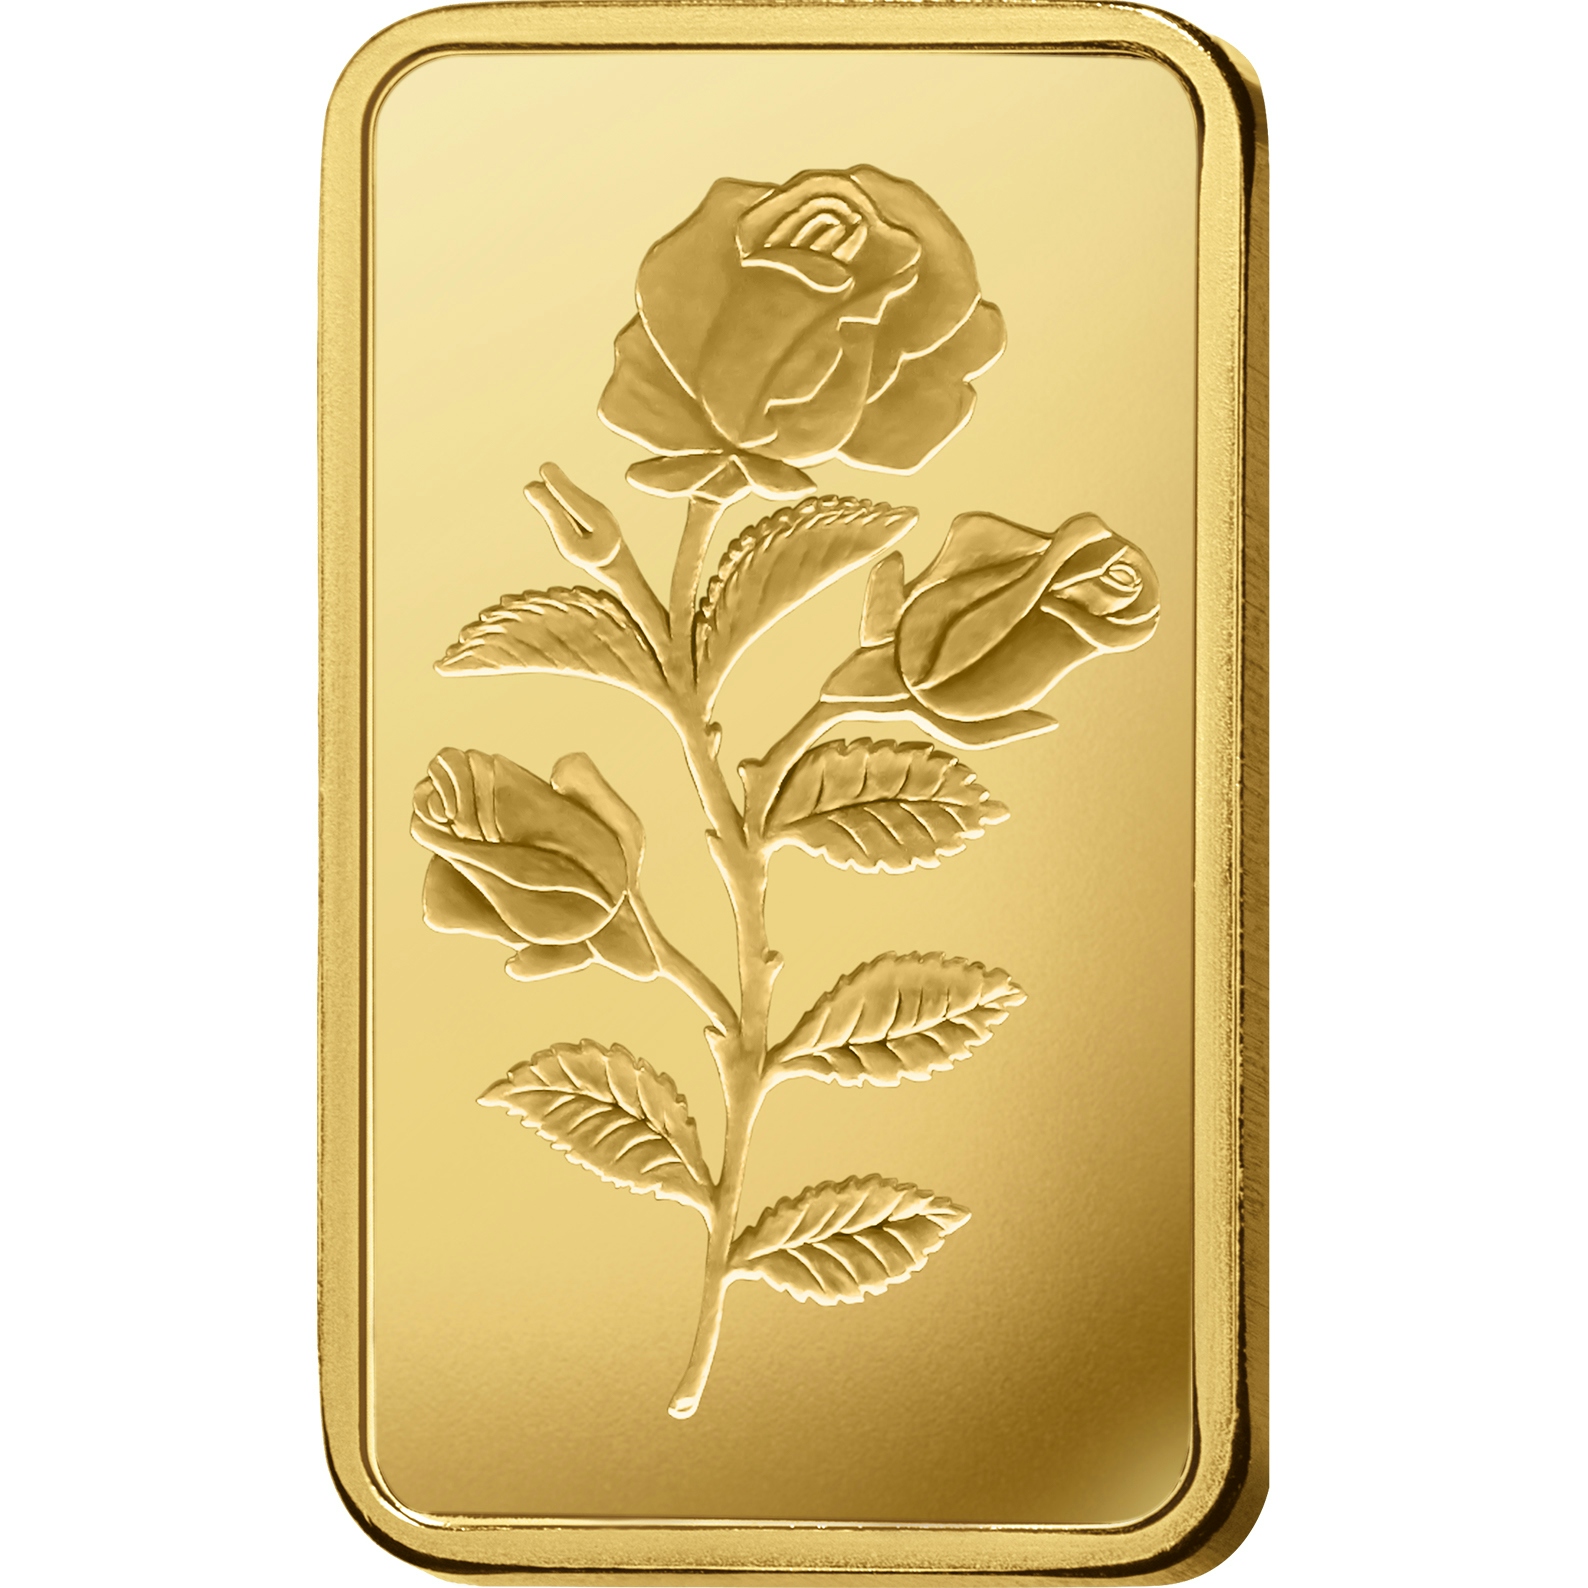 Achat d'or, 2.5 gram d'or pur Rosa - PAMP Suisse - Front 